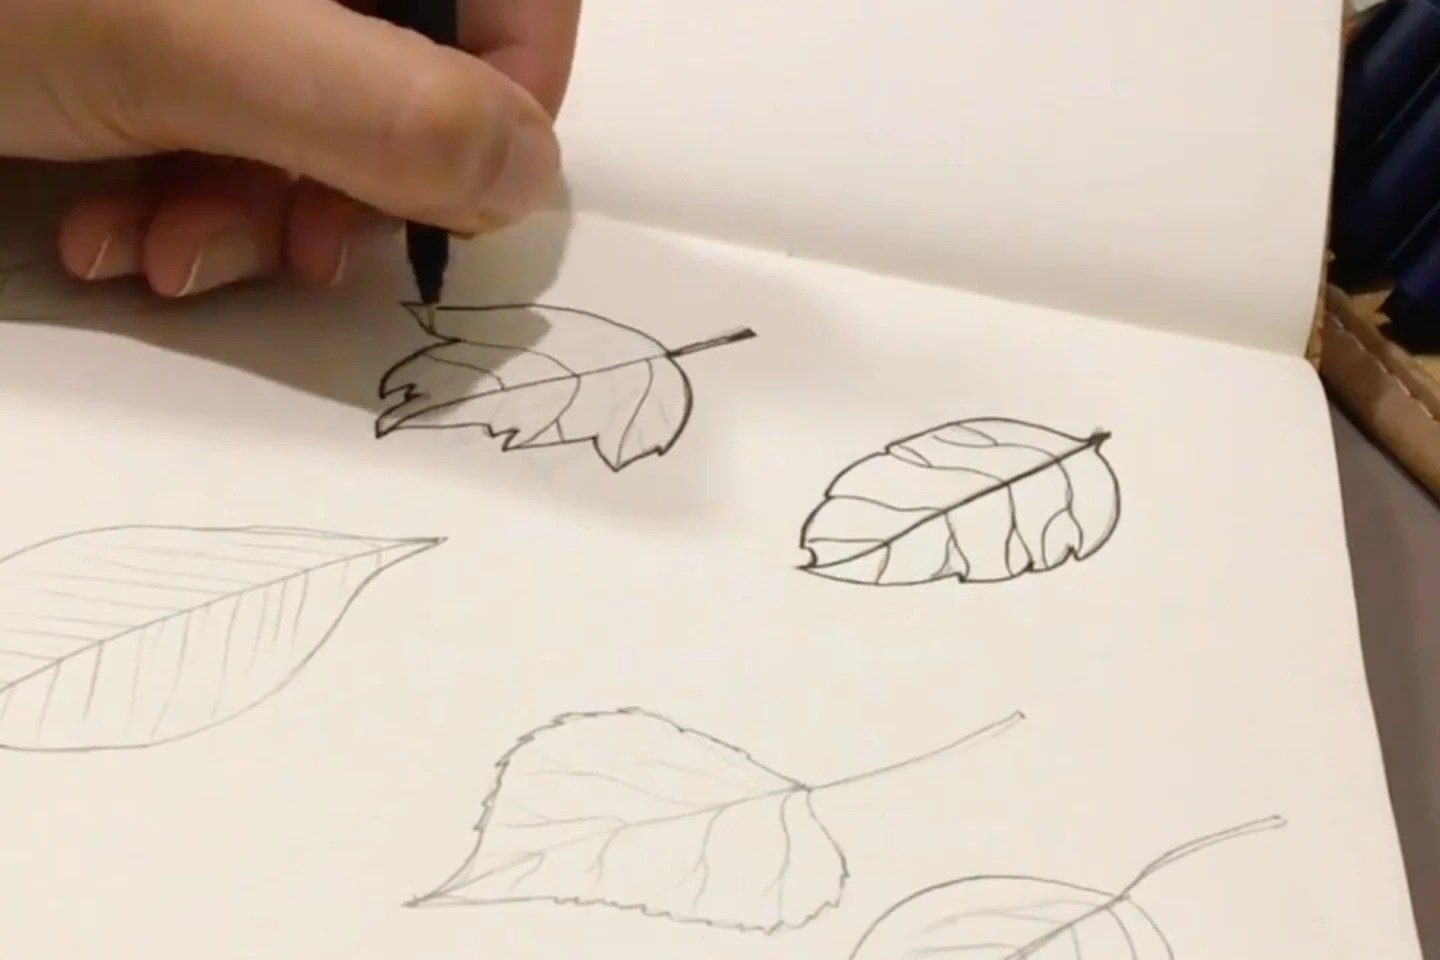 How To Draw A Leaf